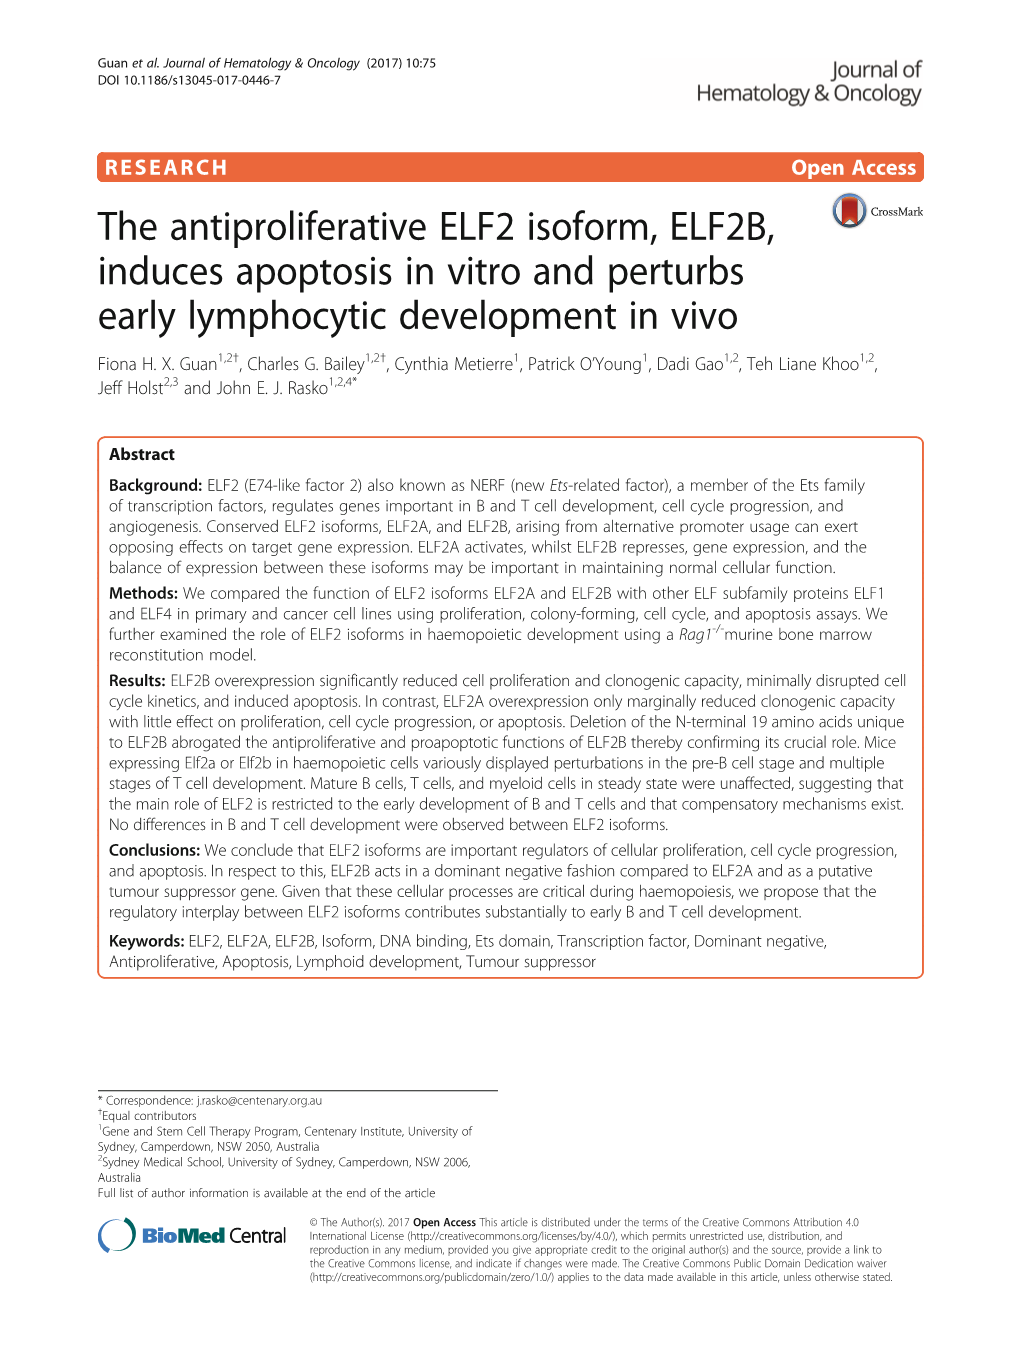 The Antiproliferative ELF2 Isoform, ELF2B, Induces Apoptosis in Vitro and Perturbs Early Lymphocytic Development in Vivo Fiona H